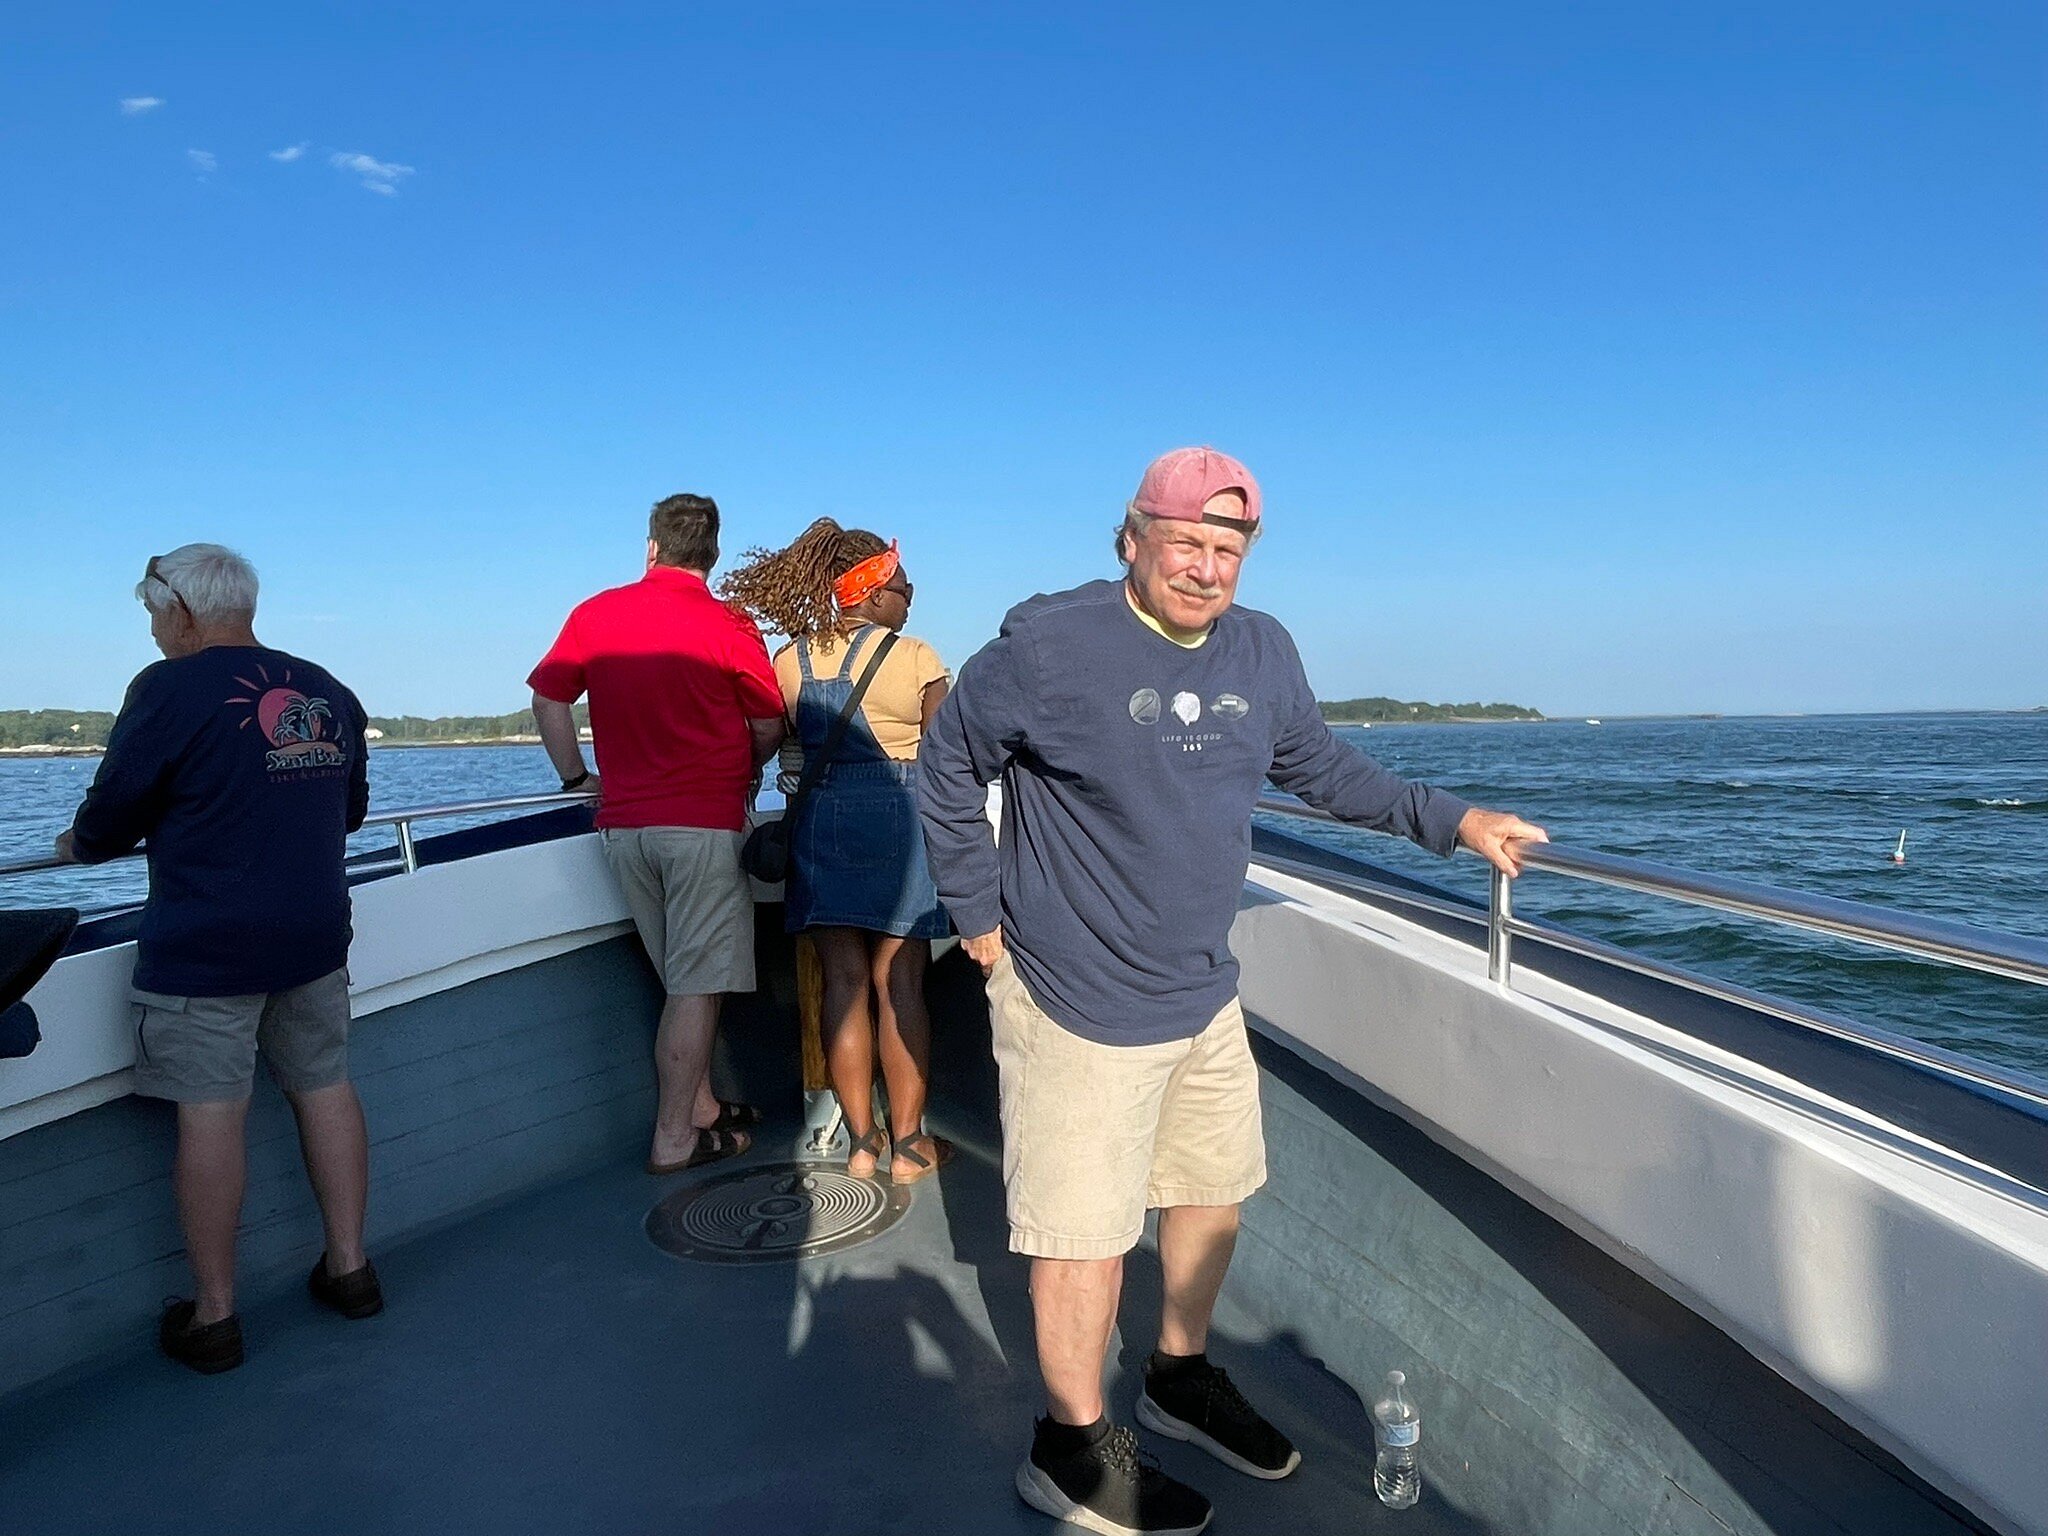 Portsmouth Harbor Cruises All You Need to Know BEFORE You Go